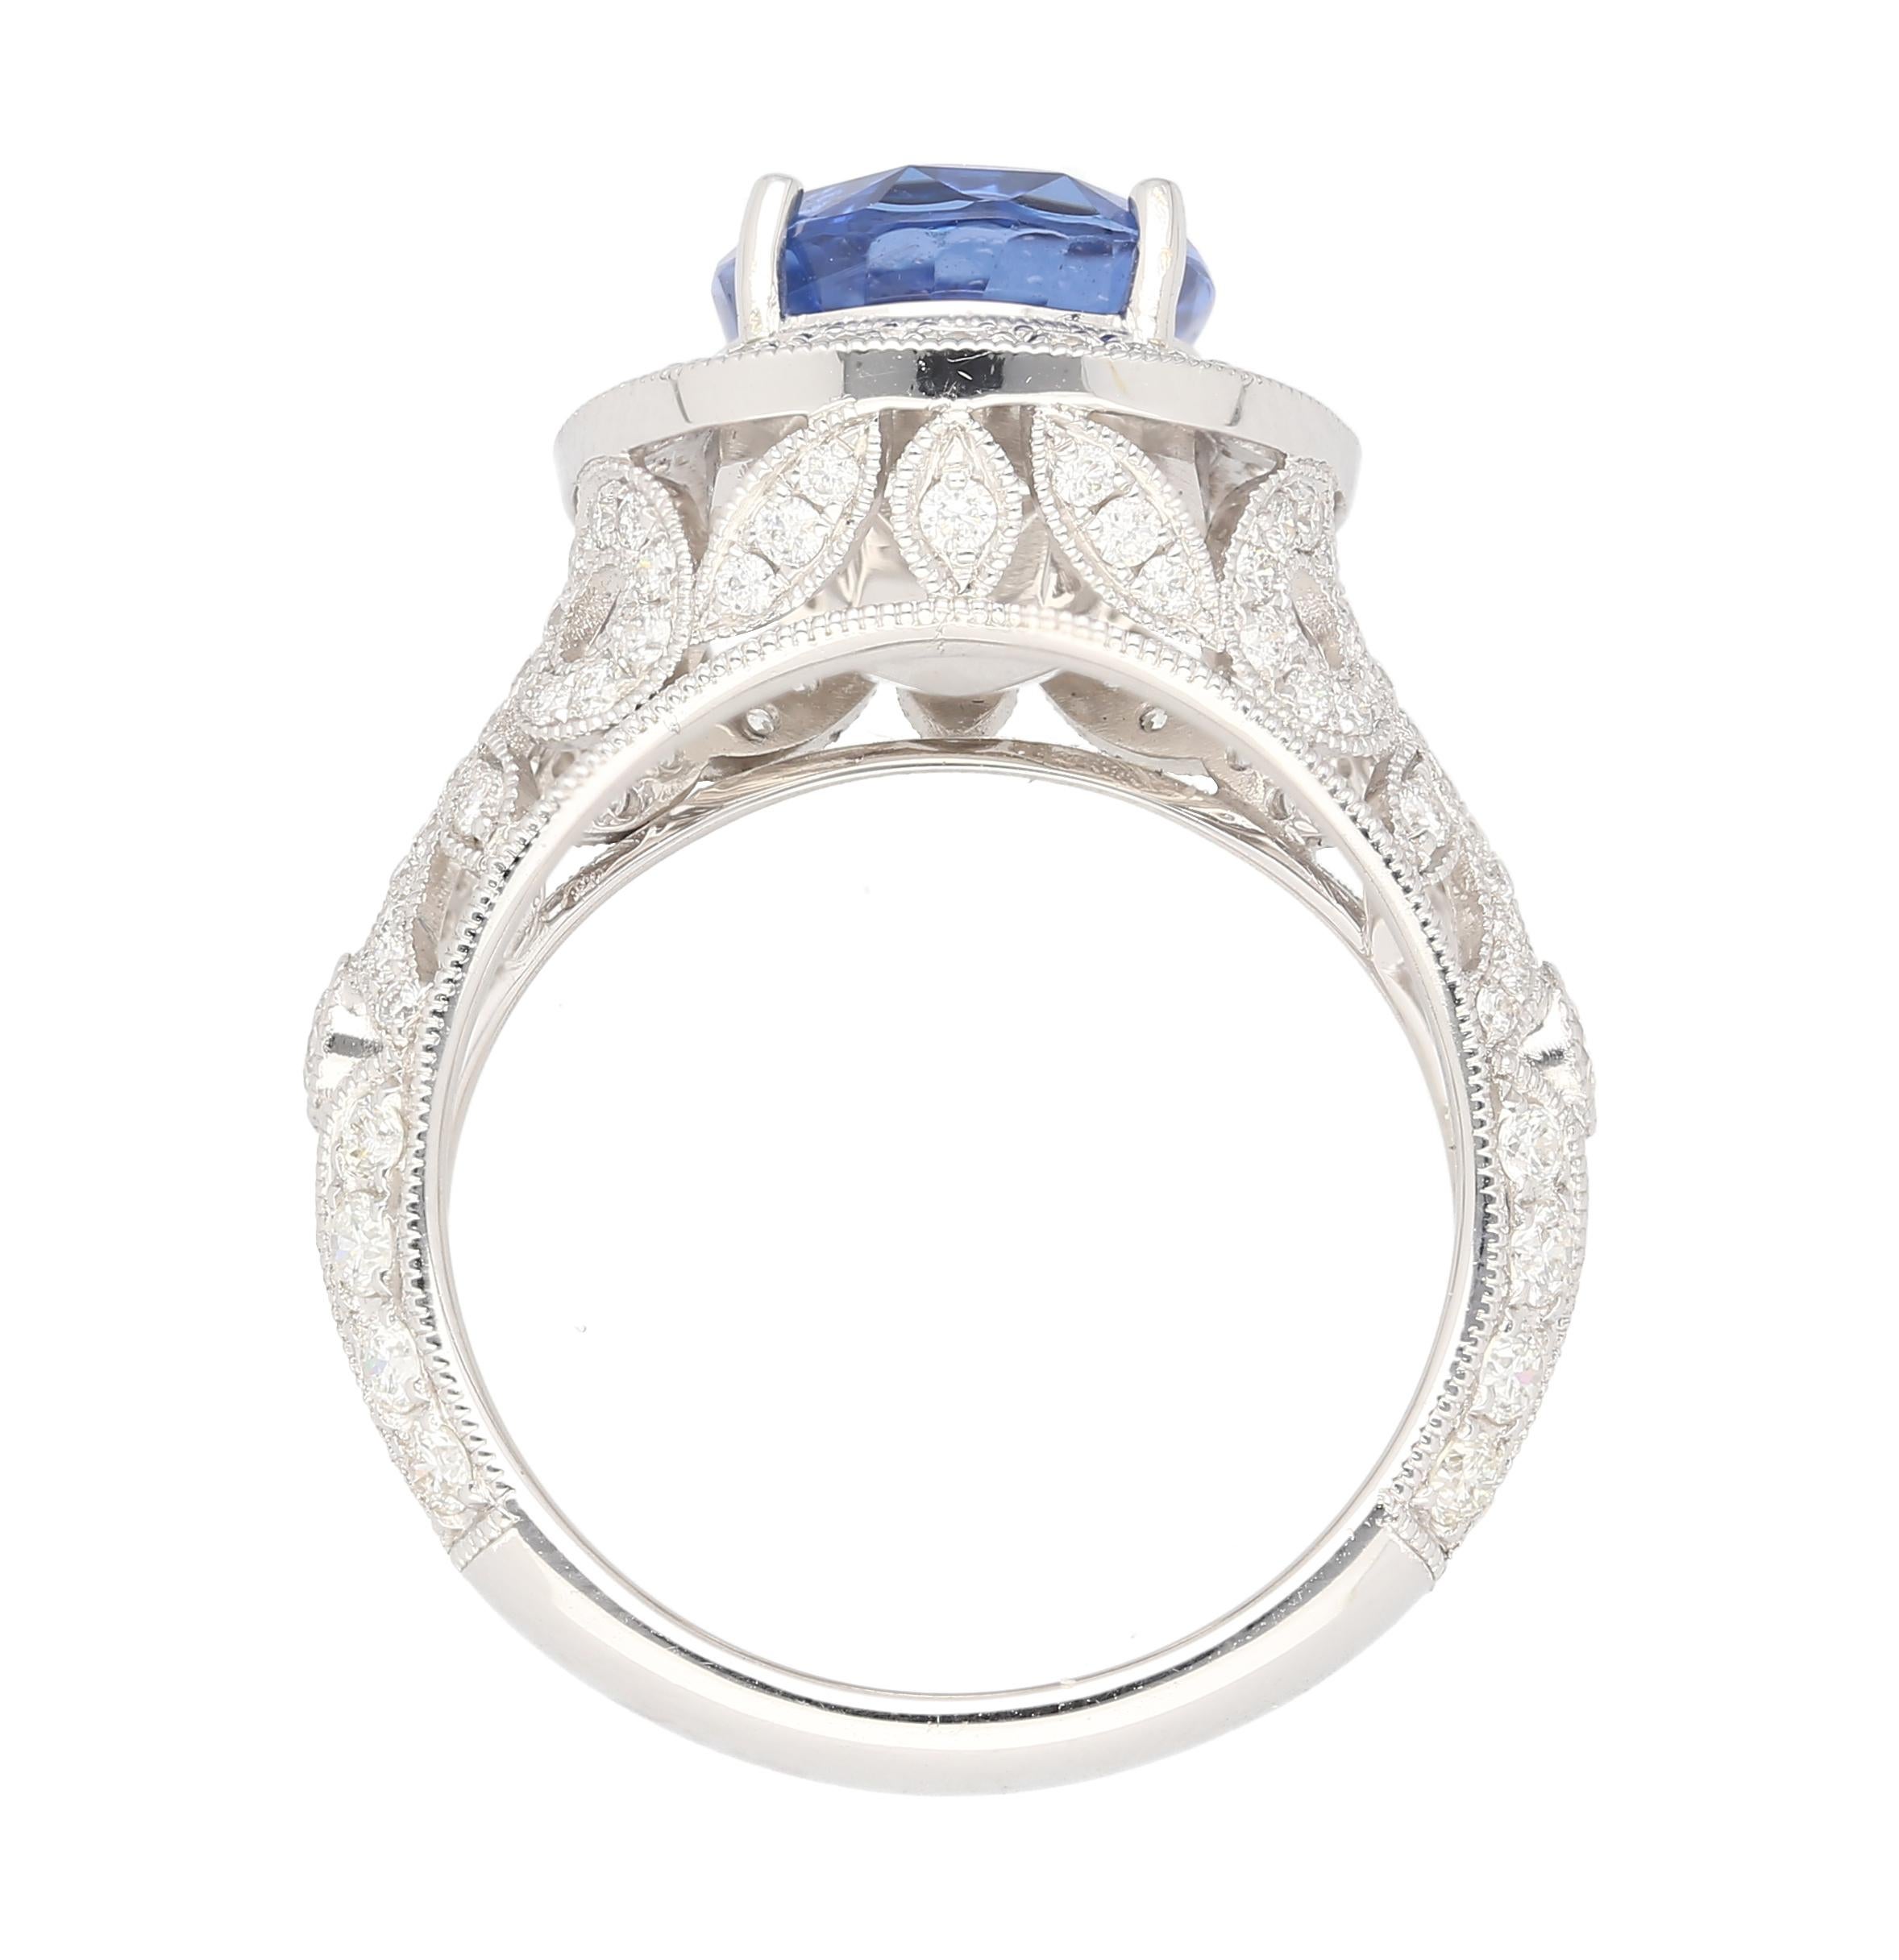 Sapphire with Diamonds in 18K White Gold Engagement Ring. 

This Ceylon GIA certified oval-cut natural sapphire exudes a violet-blue hue and weighs 4.84 carats. Non-treated sapphire. Adorned with 124 round-cut white diamonds weighing 1.25 carats